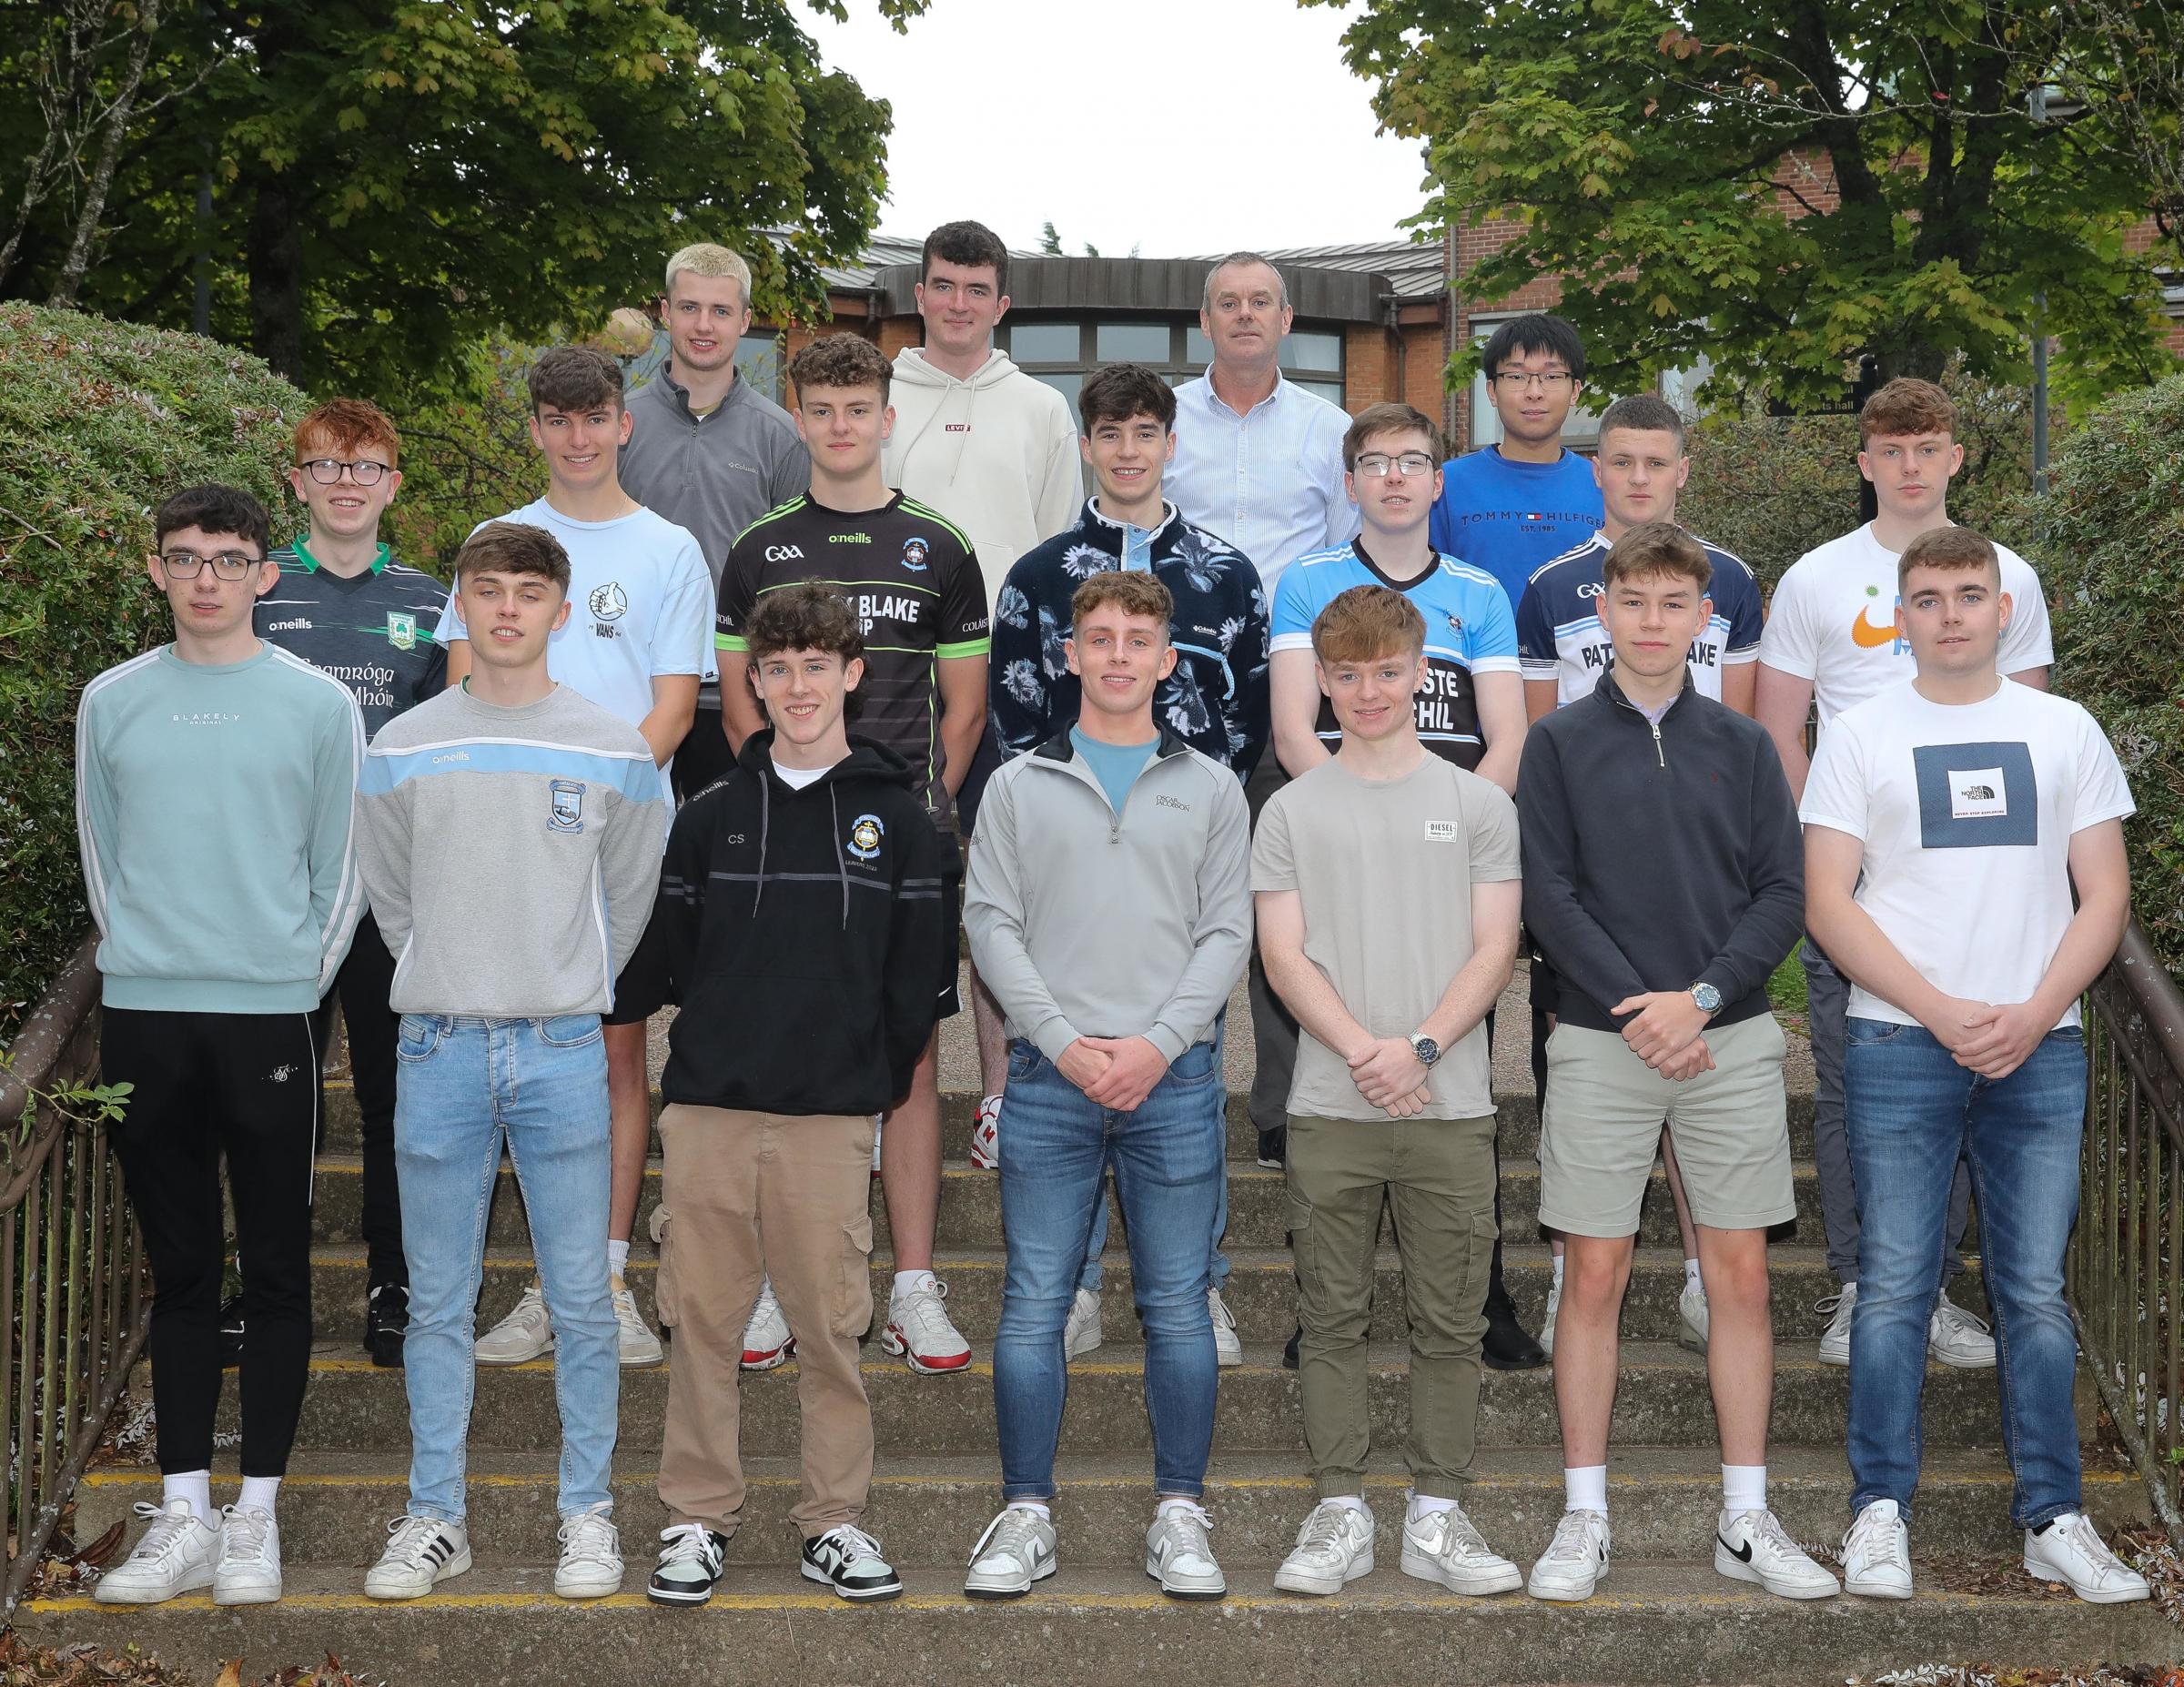 St. Michaels College, Enniskillen. Back row, from left: Lanty Feely, Ryan Gilleece, Principal Mark Henry and Larry Lee. Middle row, from left: Callum McGrath, Ciaran Dillon, Conall McCaffrey, Charlie Meade, Oisin Grainger, Paidi Drumm and Mark